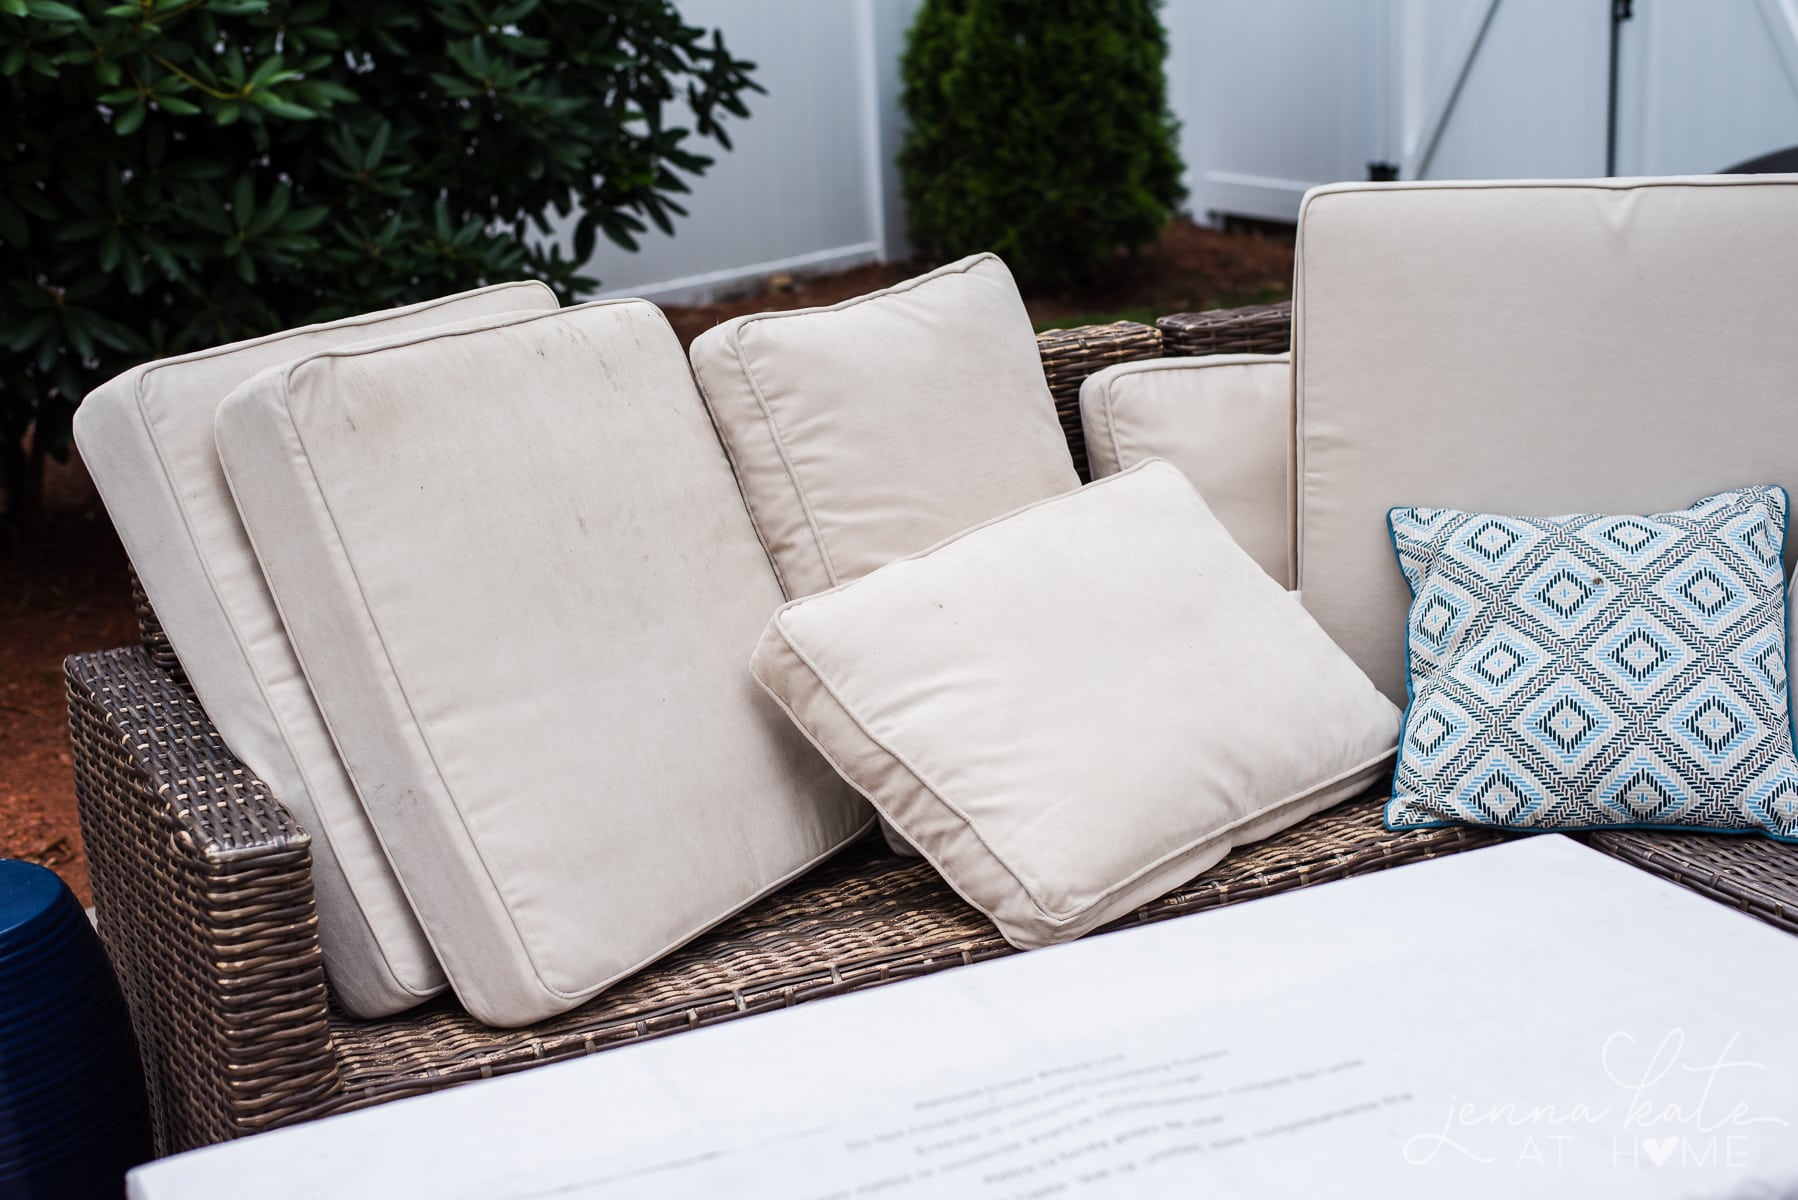 How To Clean Outdoor Cushions Jenna, How Do You Clean Outdoor Cushions Without Removable Covers